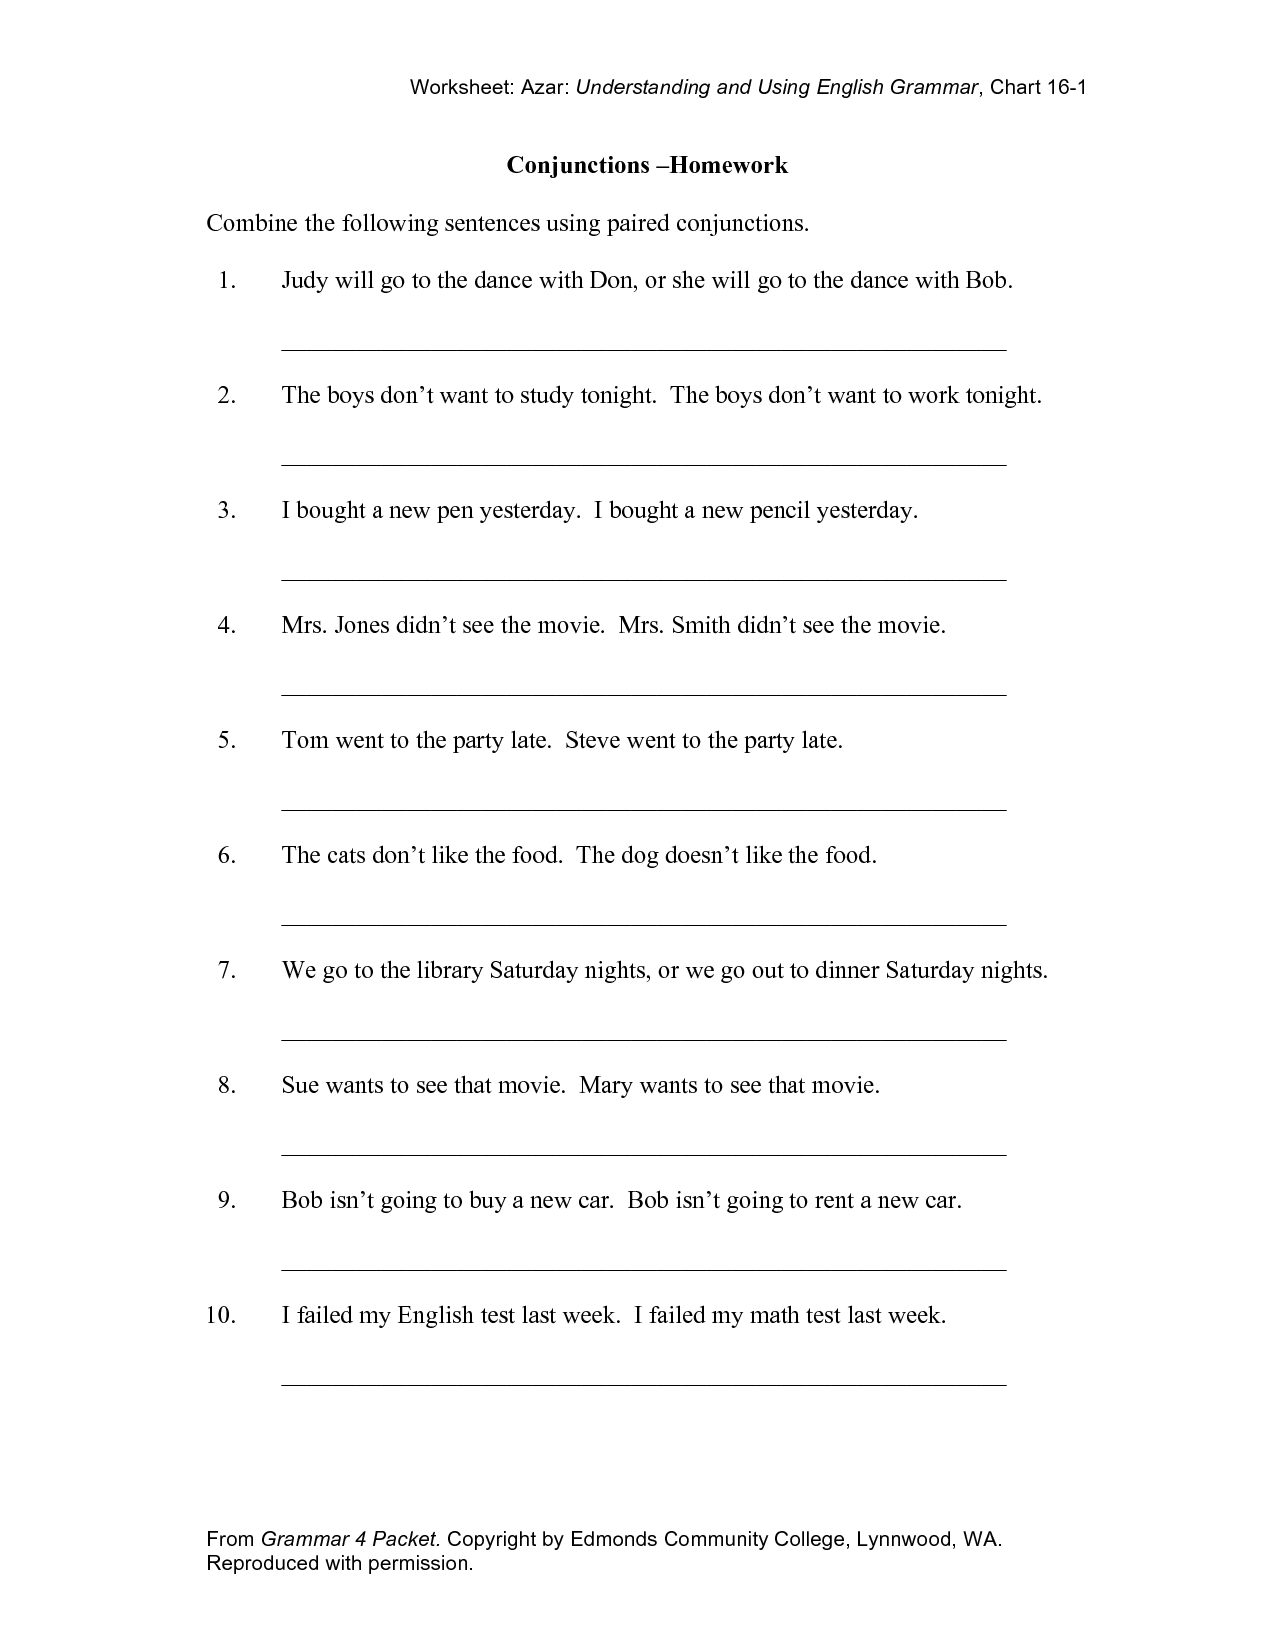 Combining Sentences With Conjunctions Worksheets